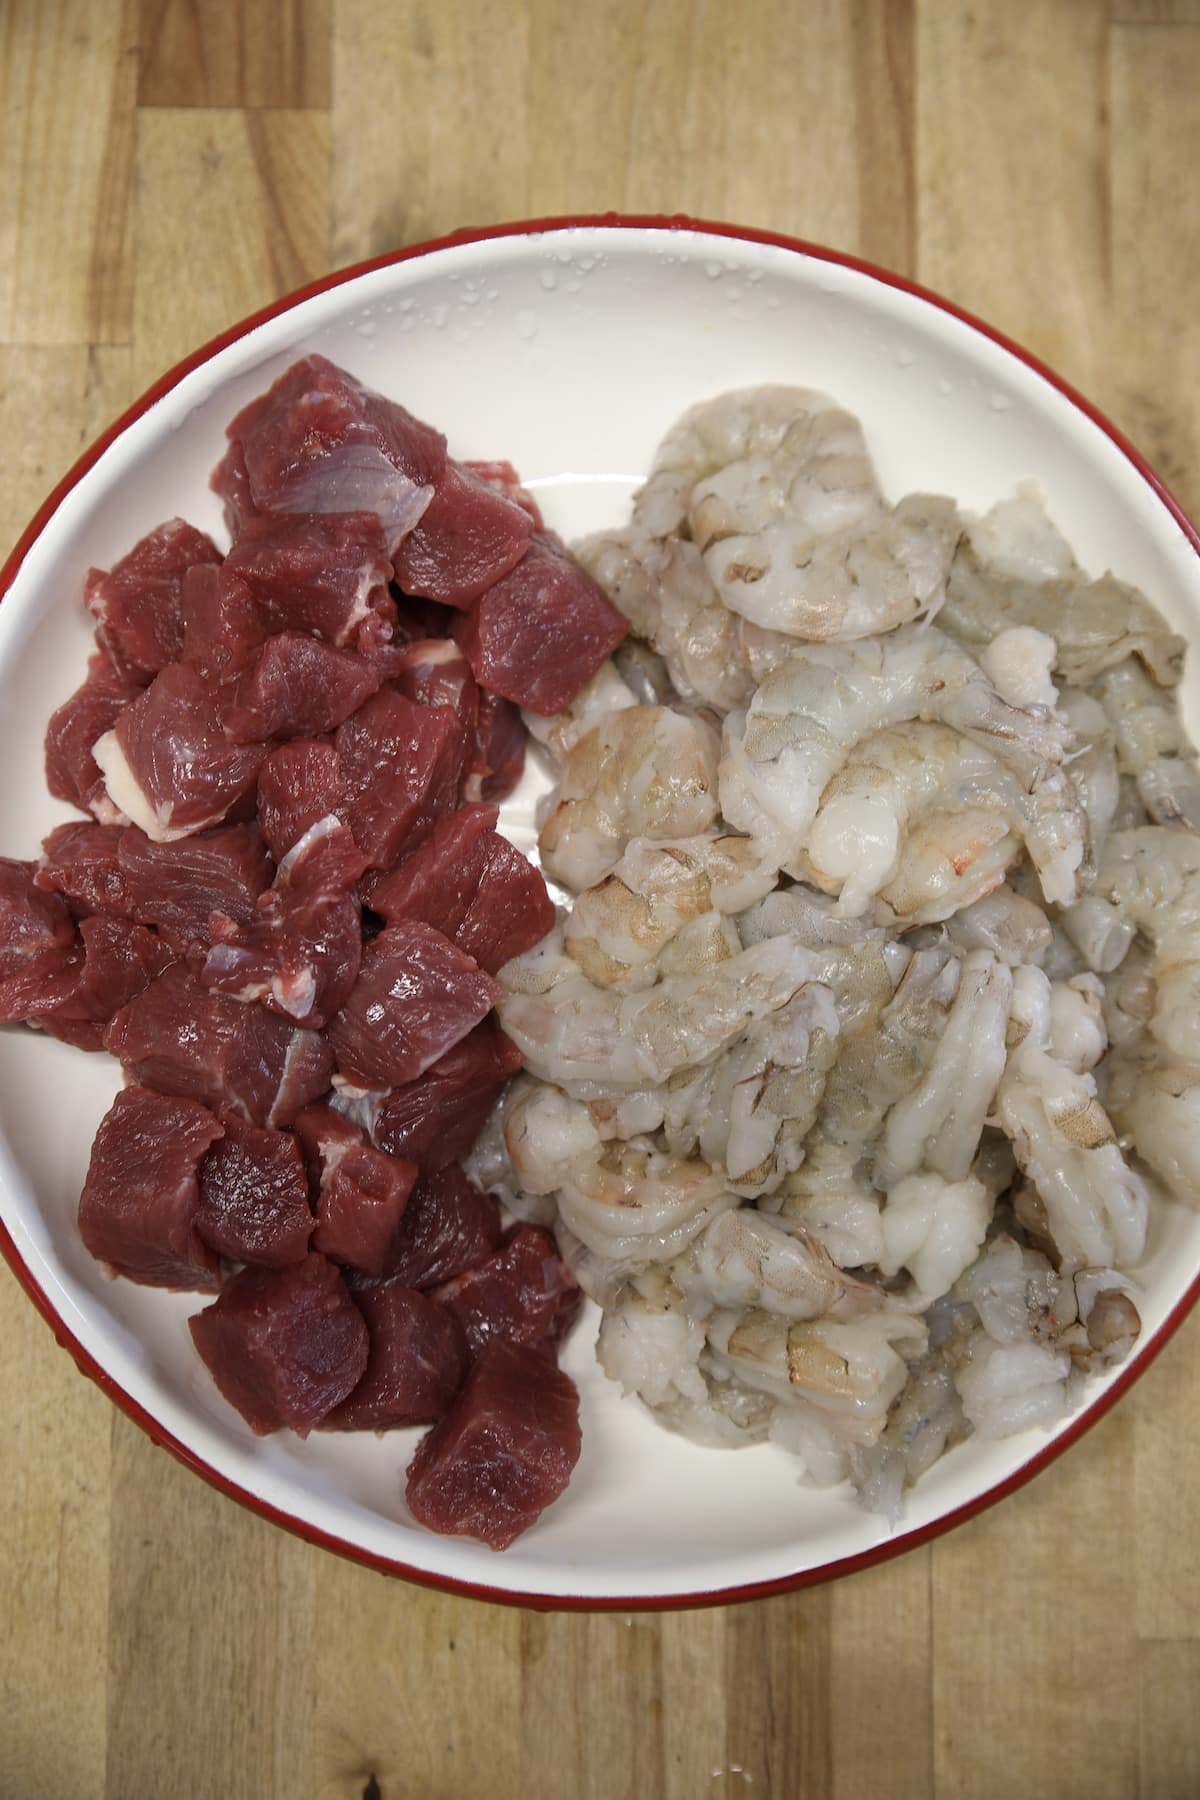 Plate of raw steak cubes and shrimp.